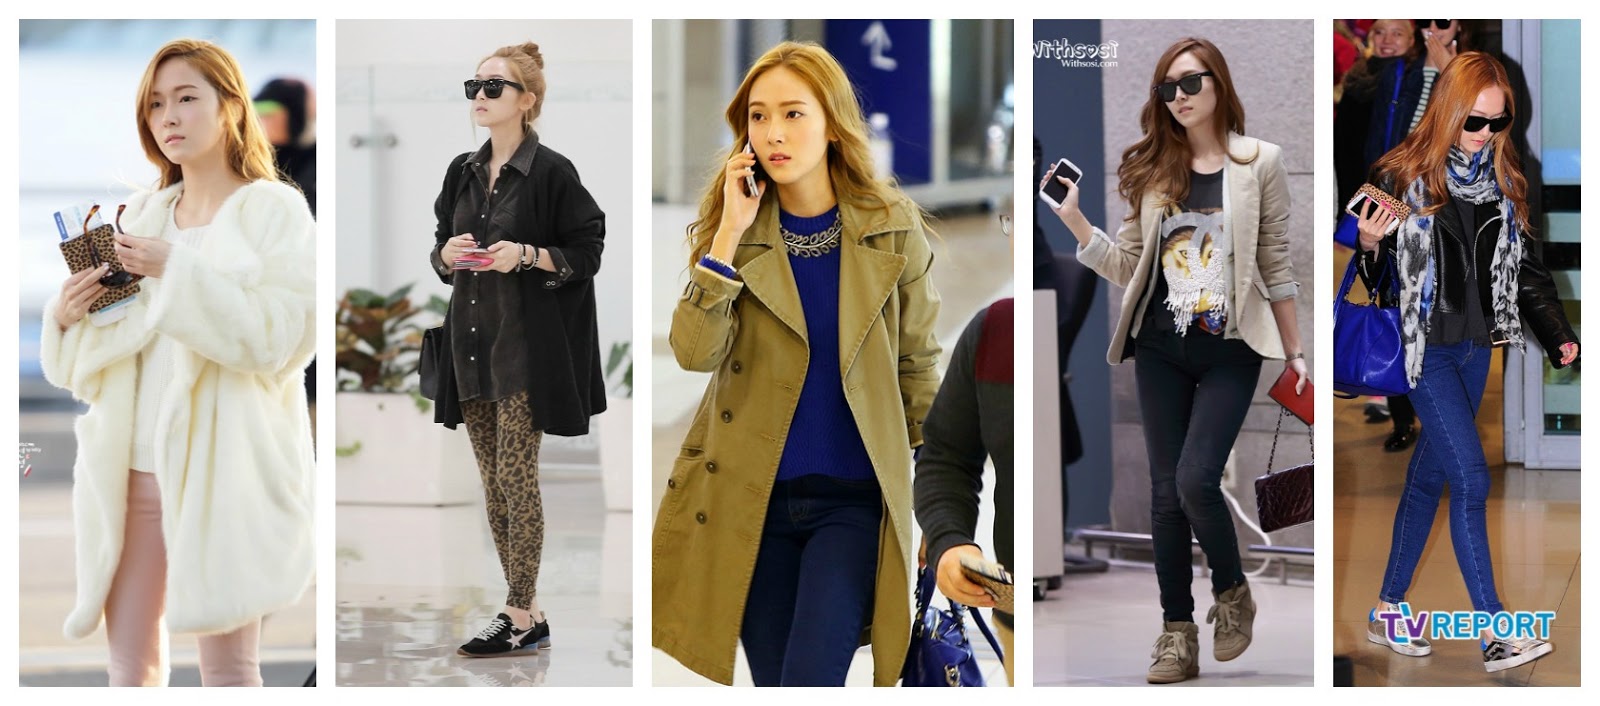 Disc Jessica With Or Without Bangs Celebrity Photos Onehallyu